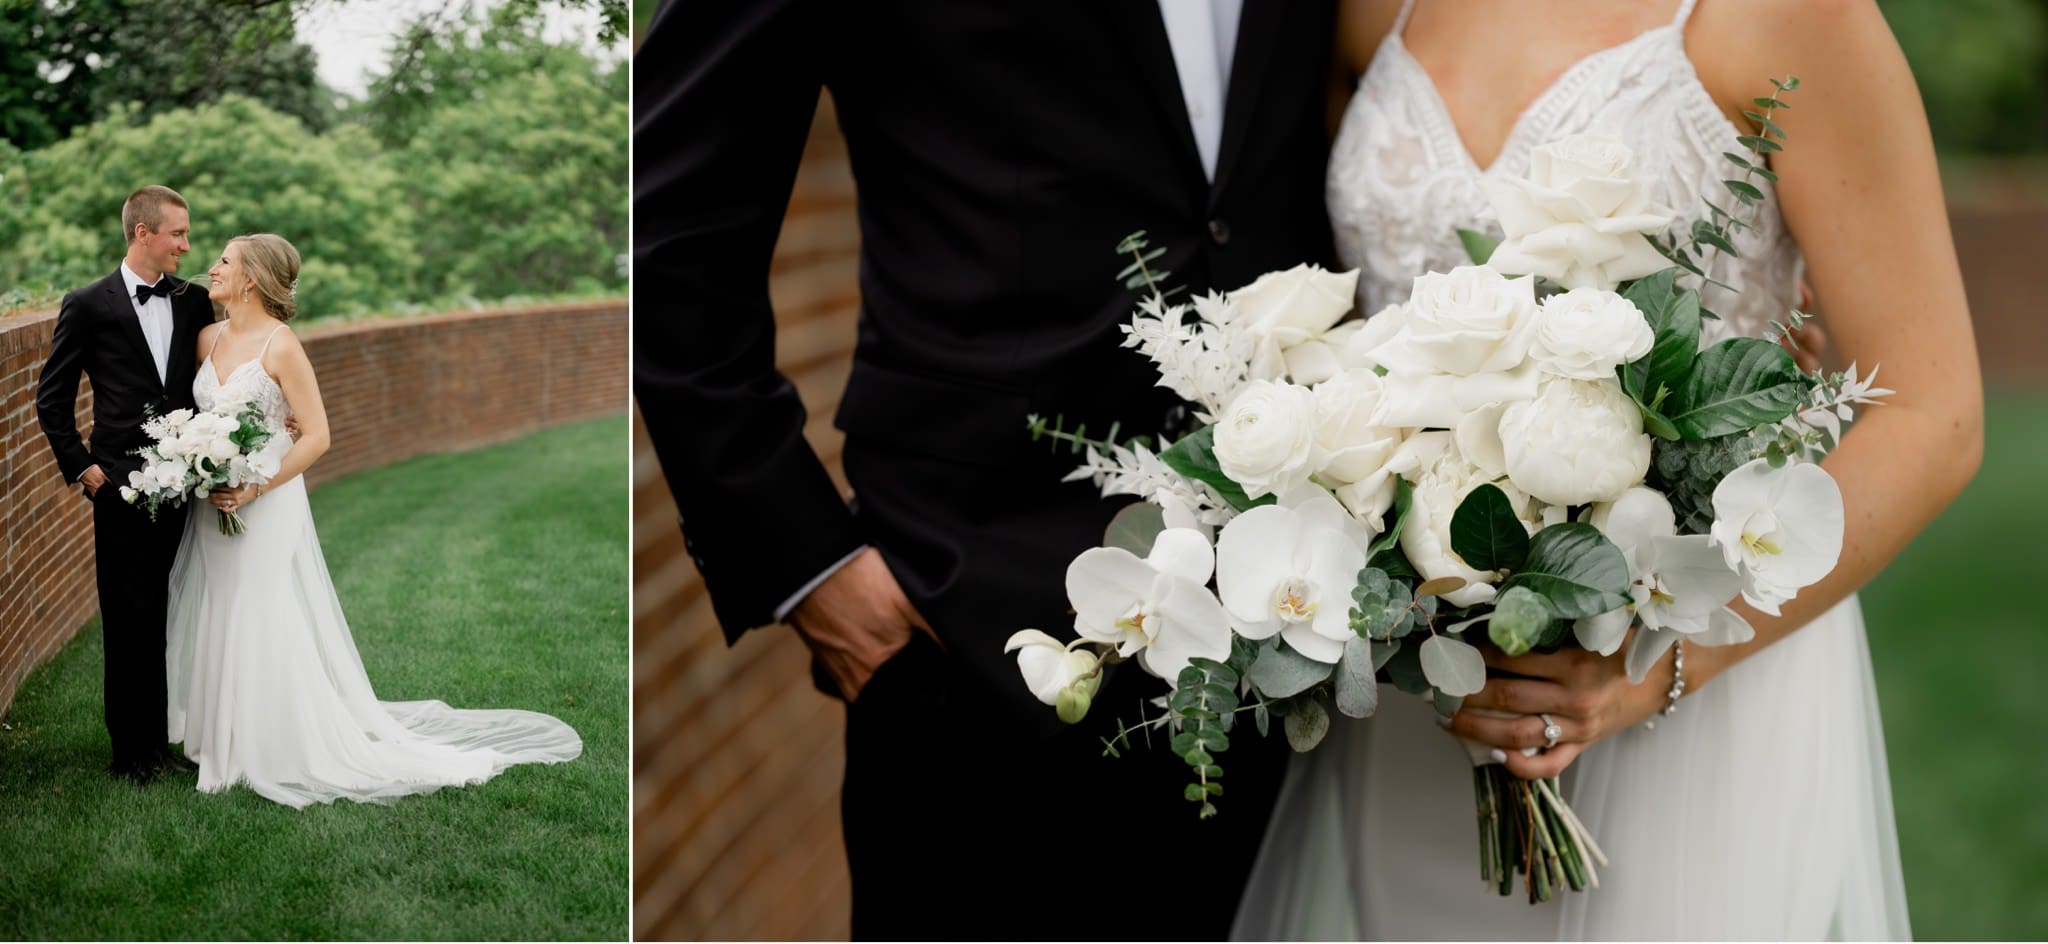 stunning wedding at Des Moines Golf and Country Club